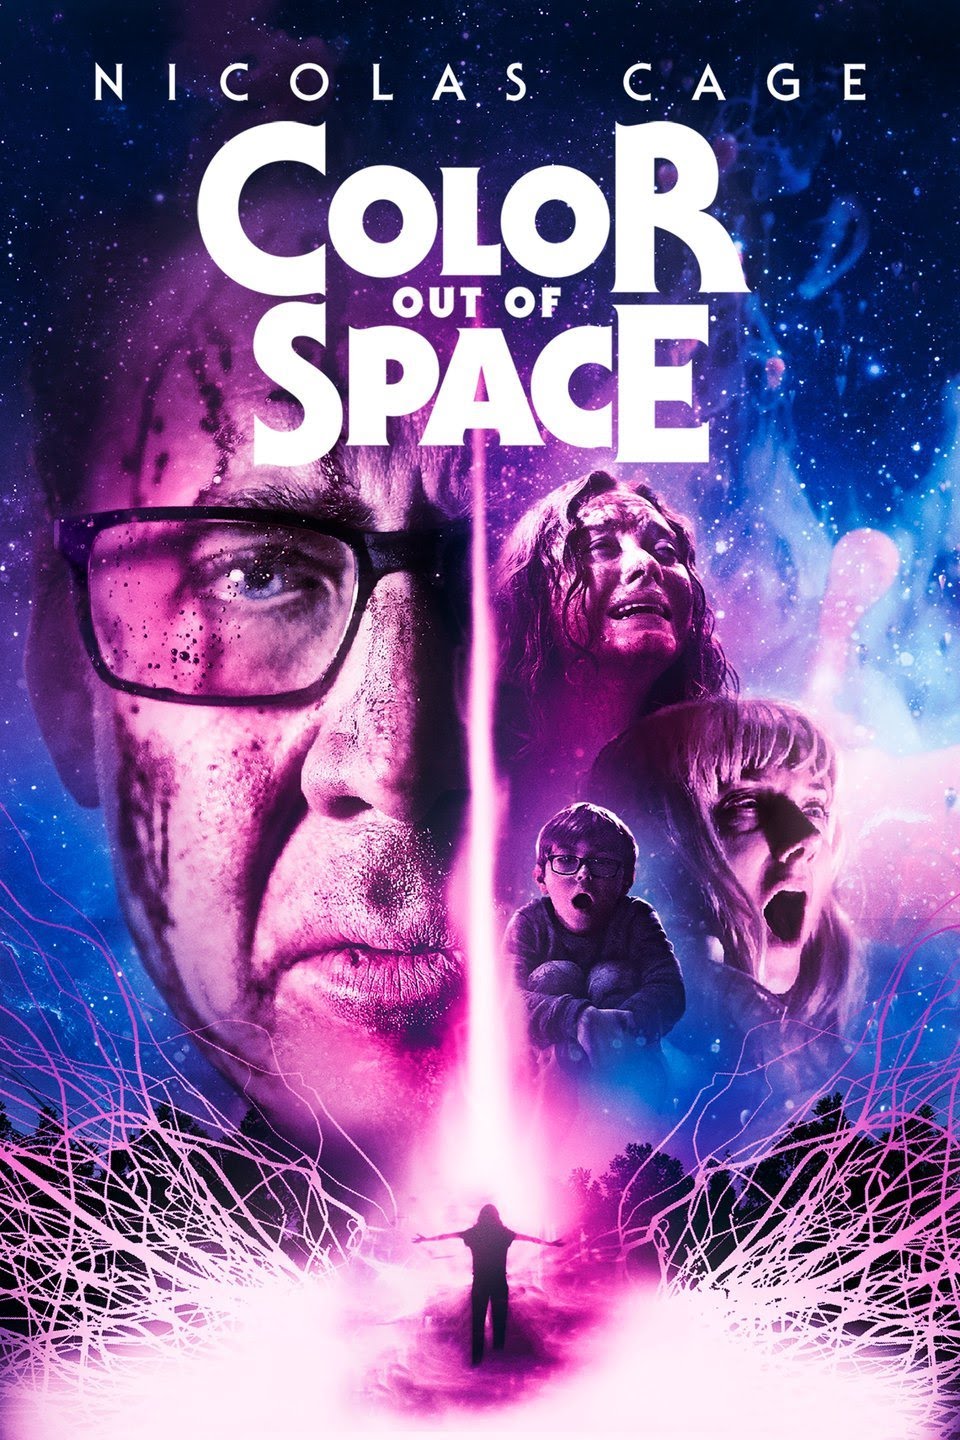 Nonton dan download Color Out of Space (2019) sub indo full movie